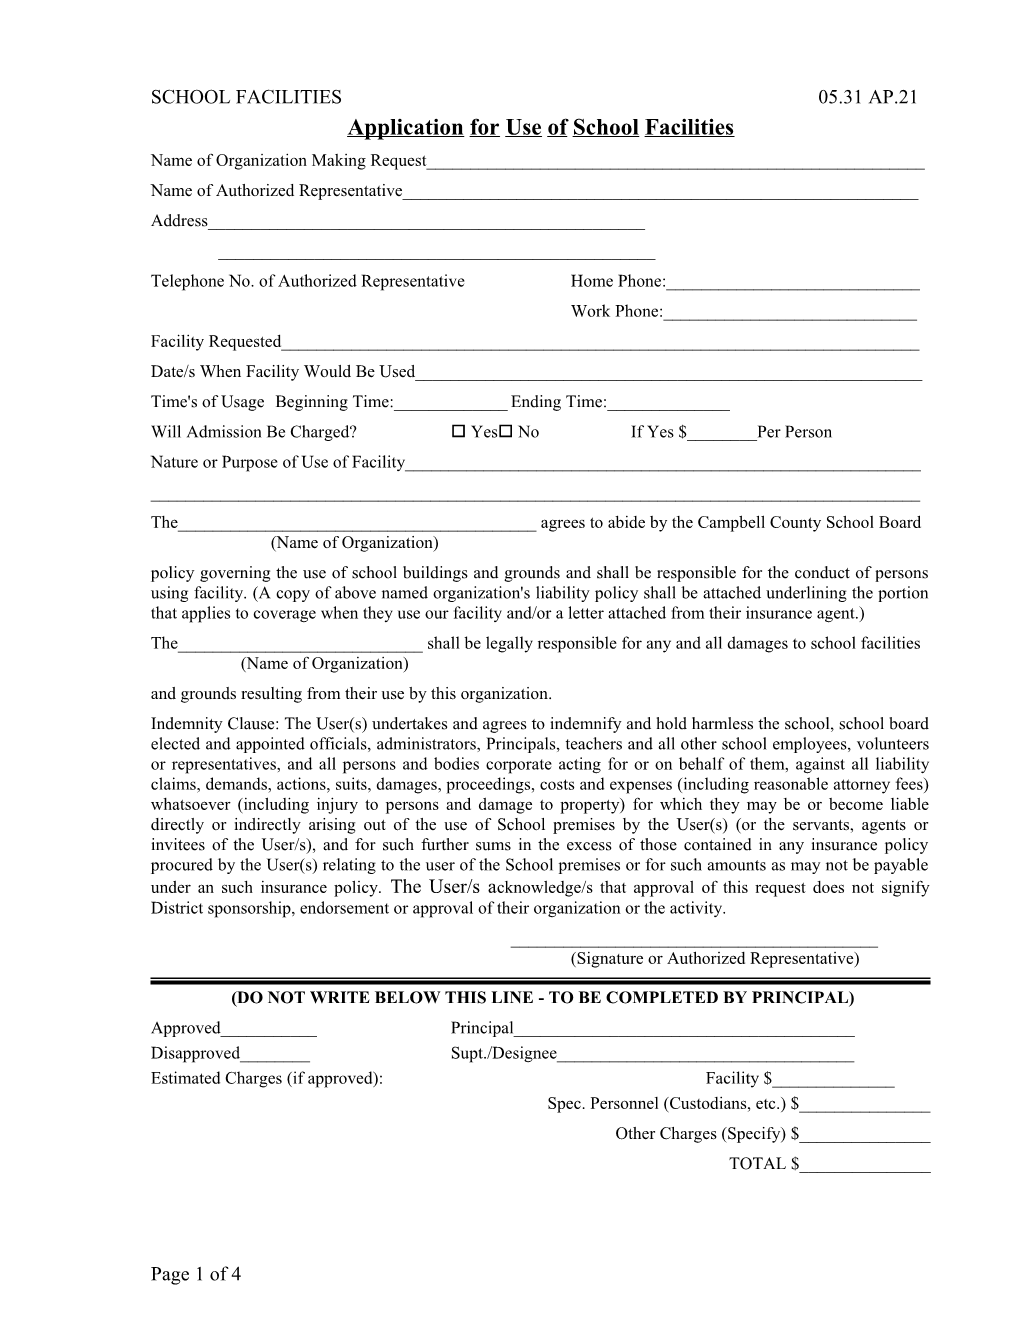 Application for Use of School Facilities